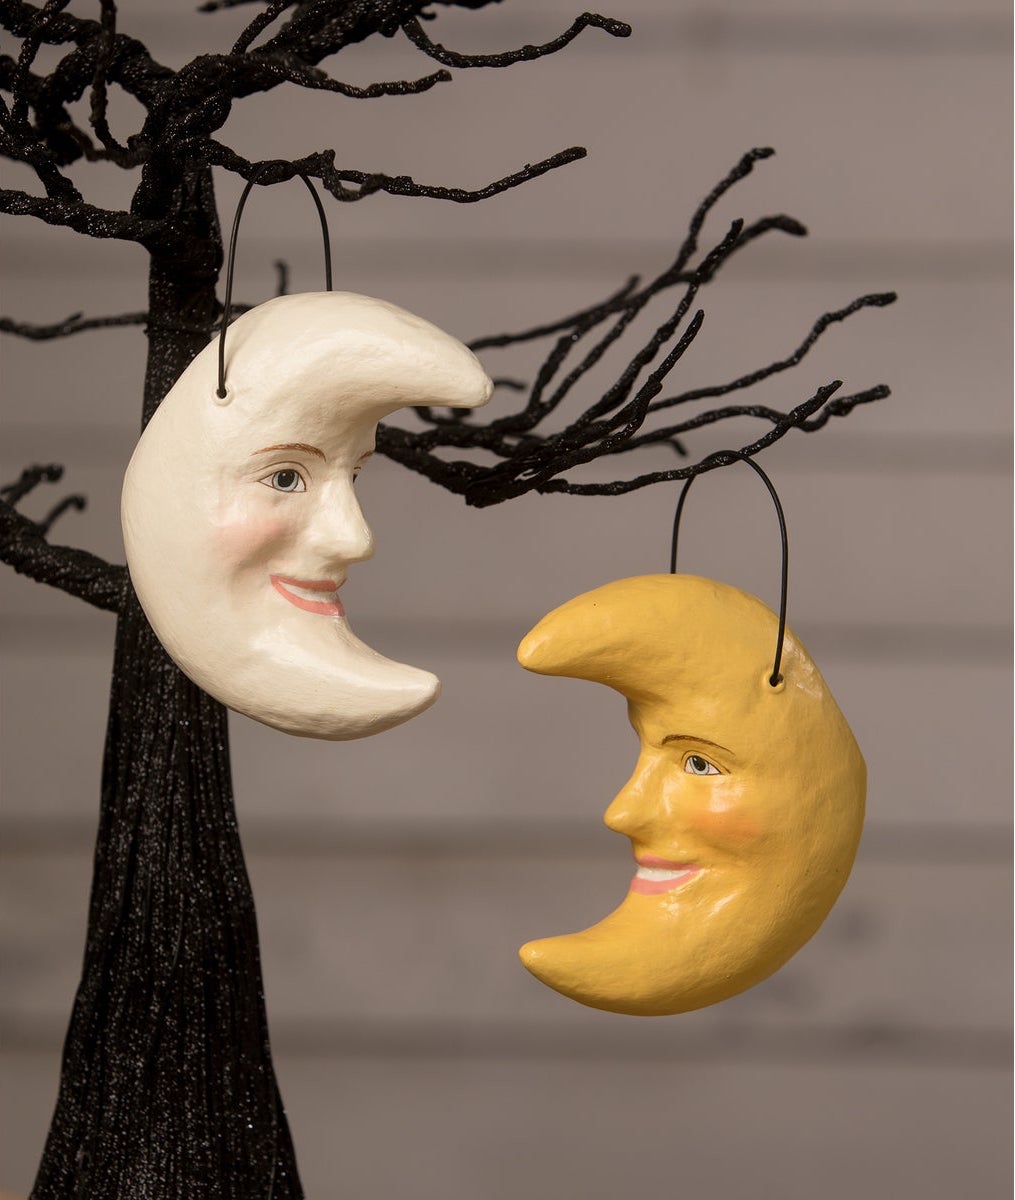 Crescent Moon Onrmanets, Man in The Moon Halloween Decorations